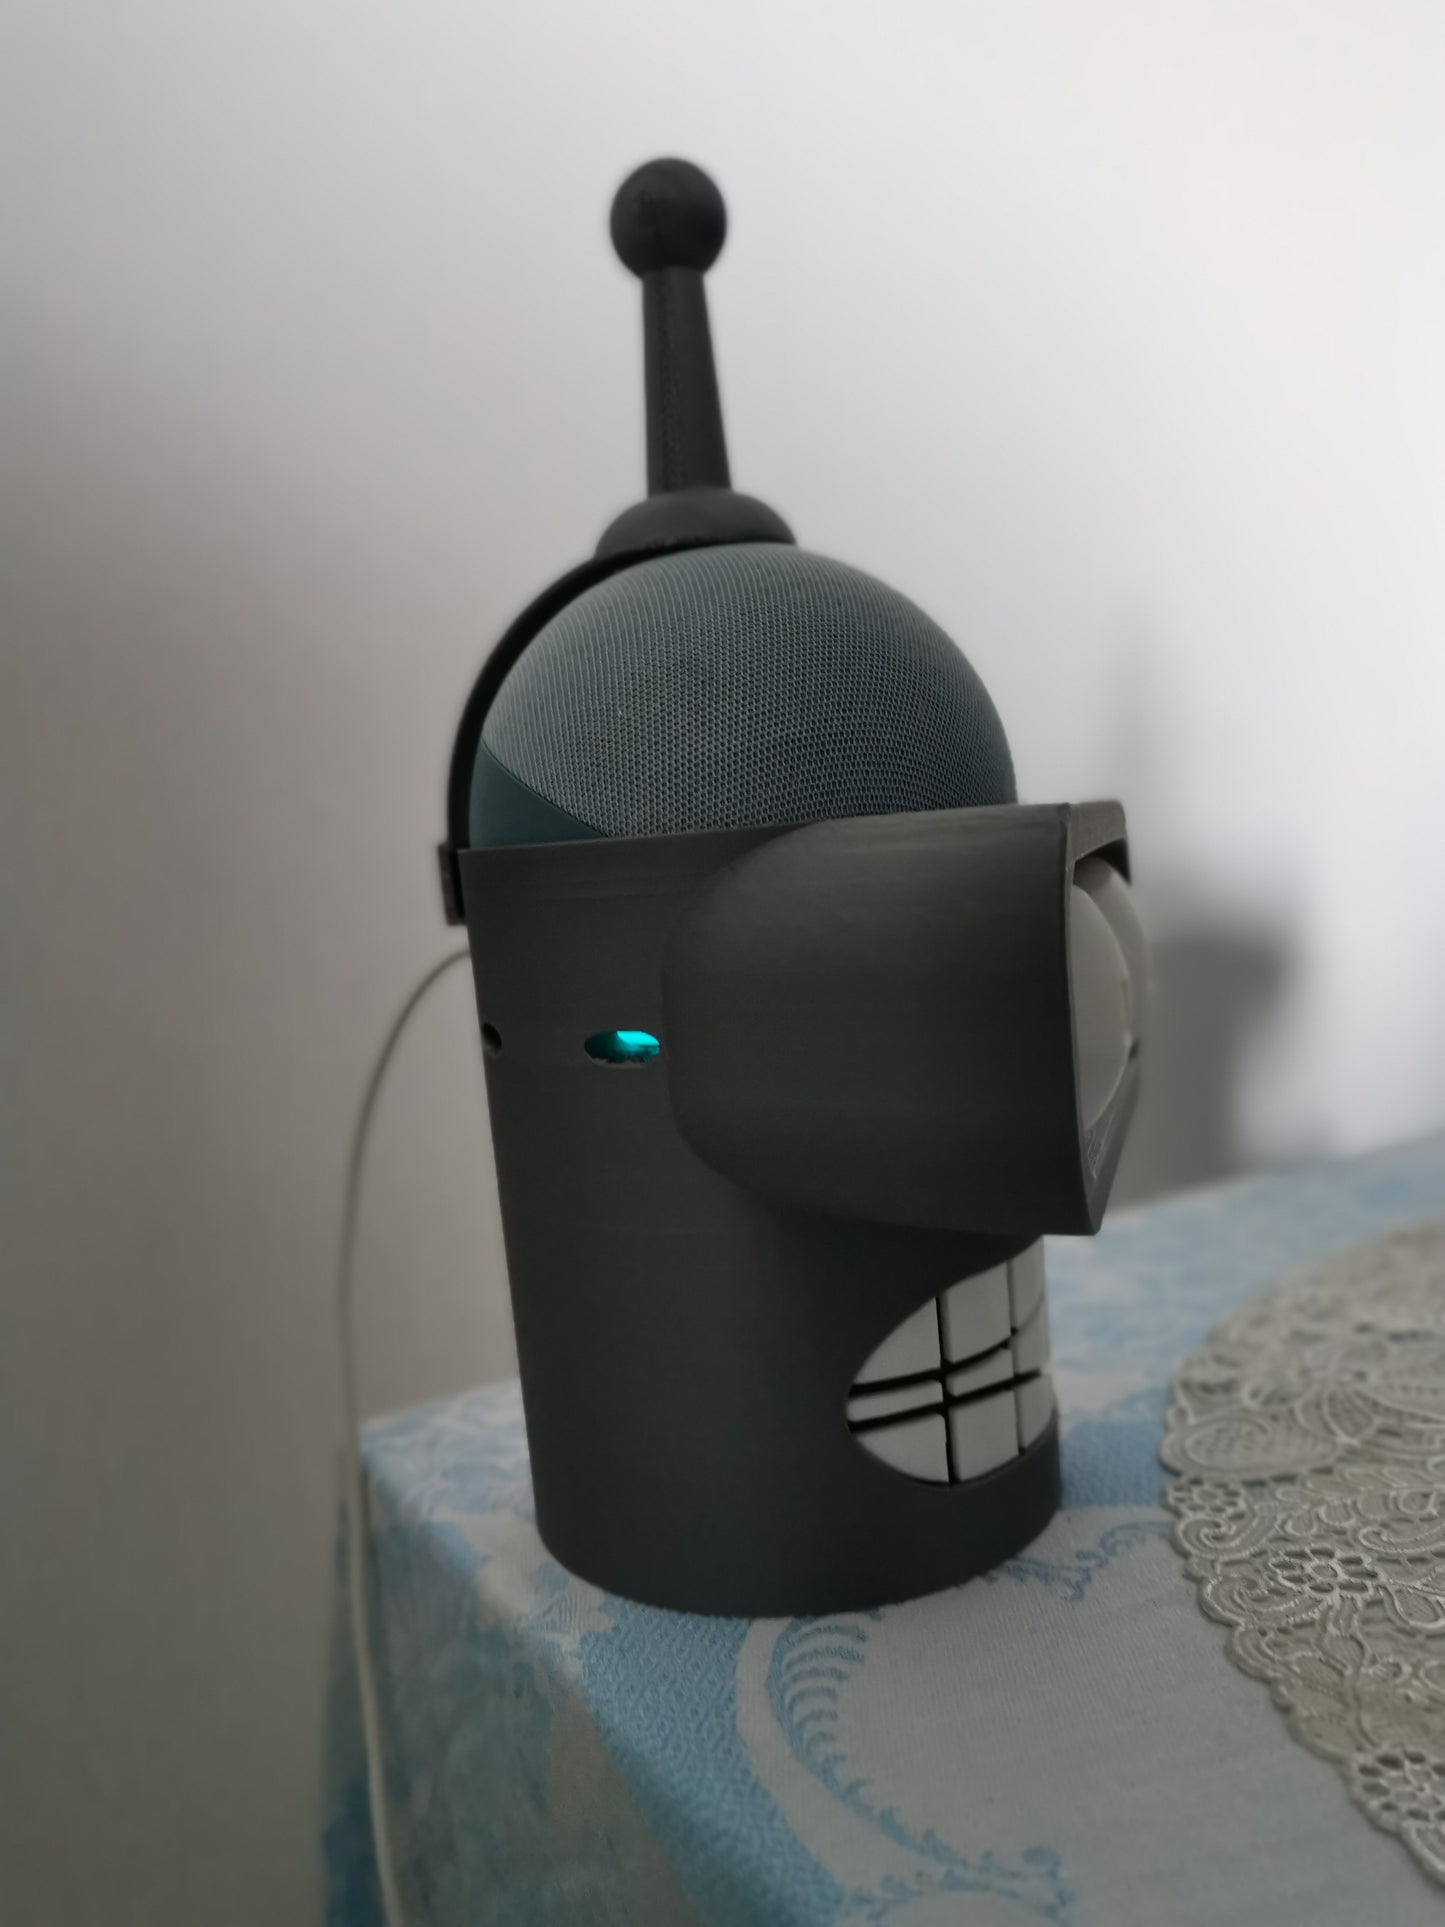 Bender Alexa Echo holder from side angle (traditional colours)